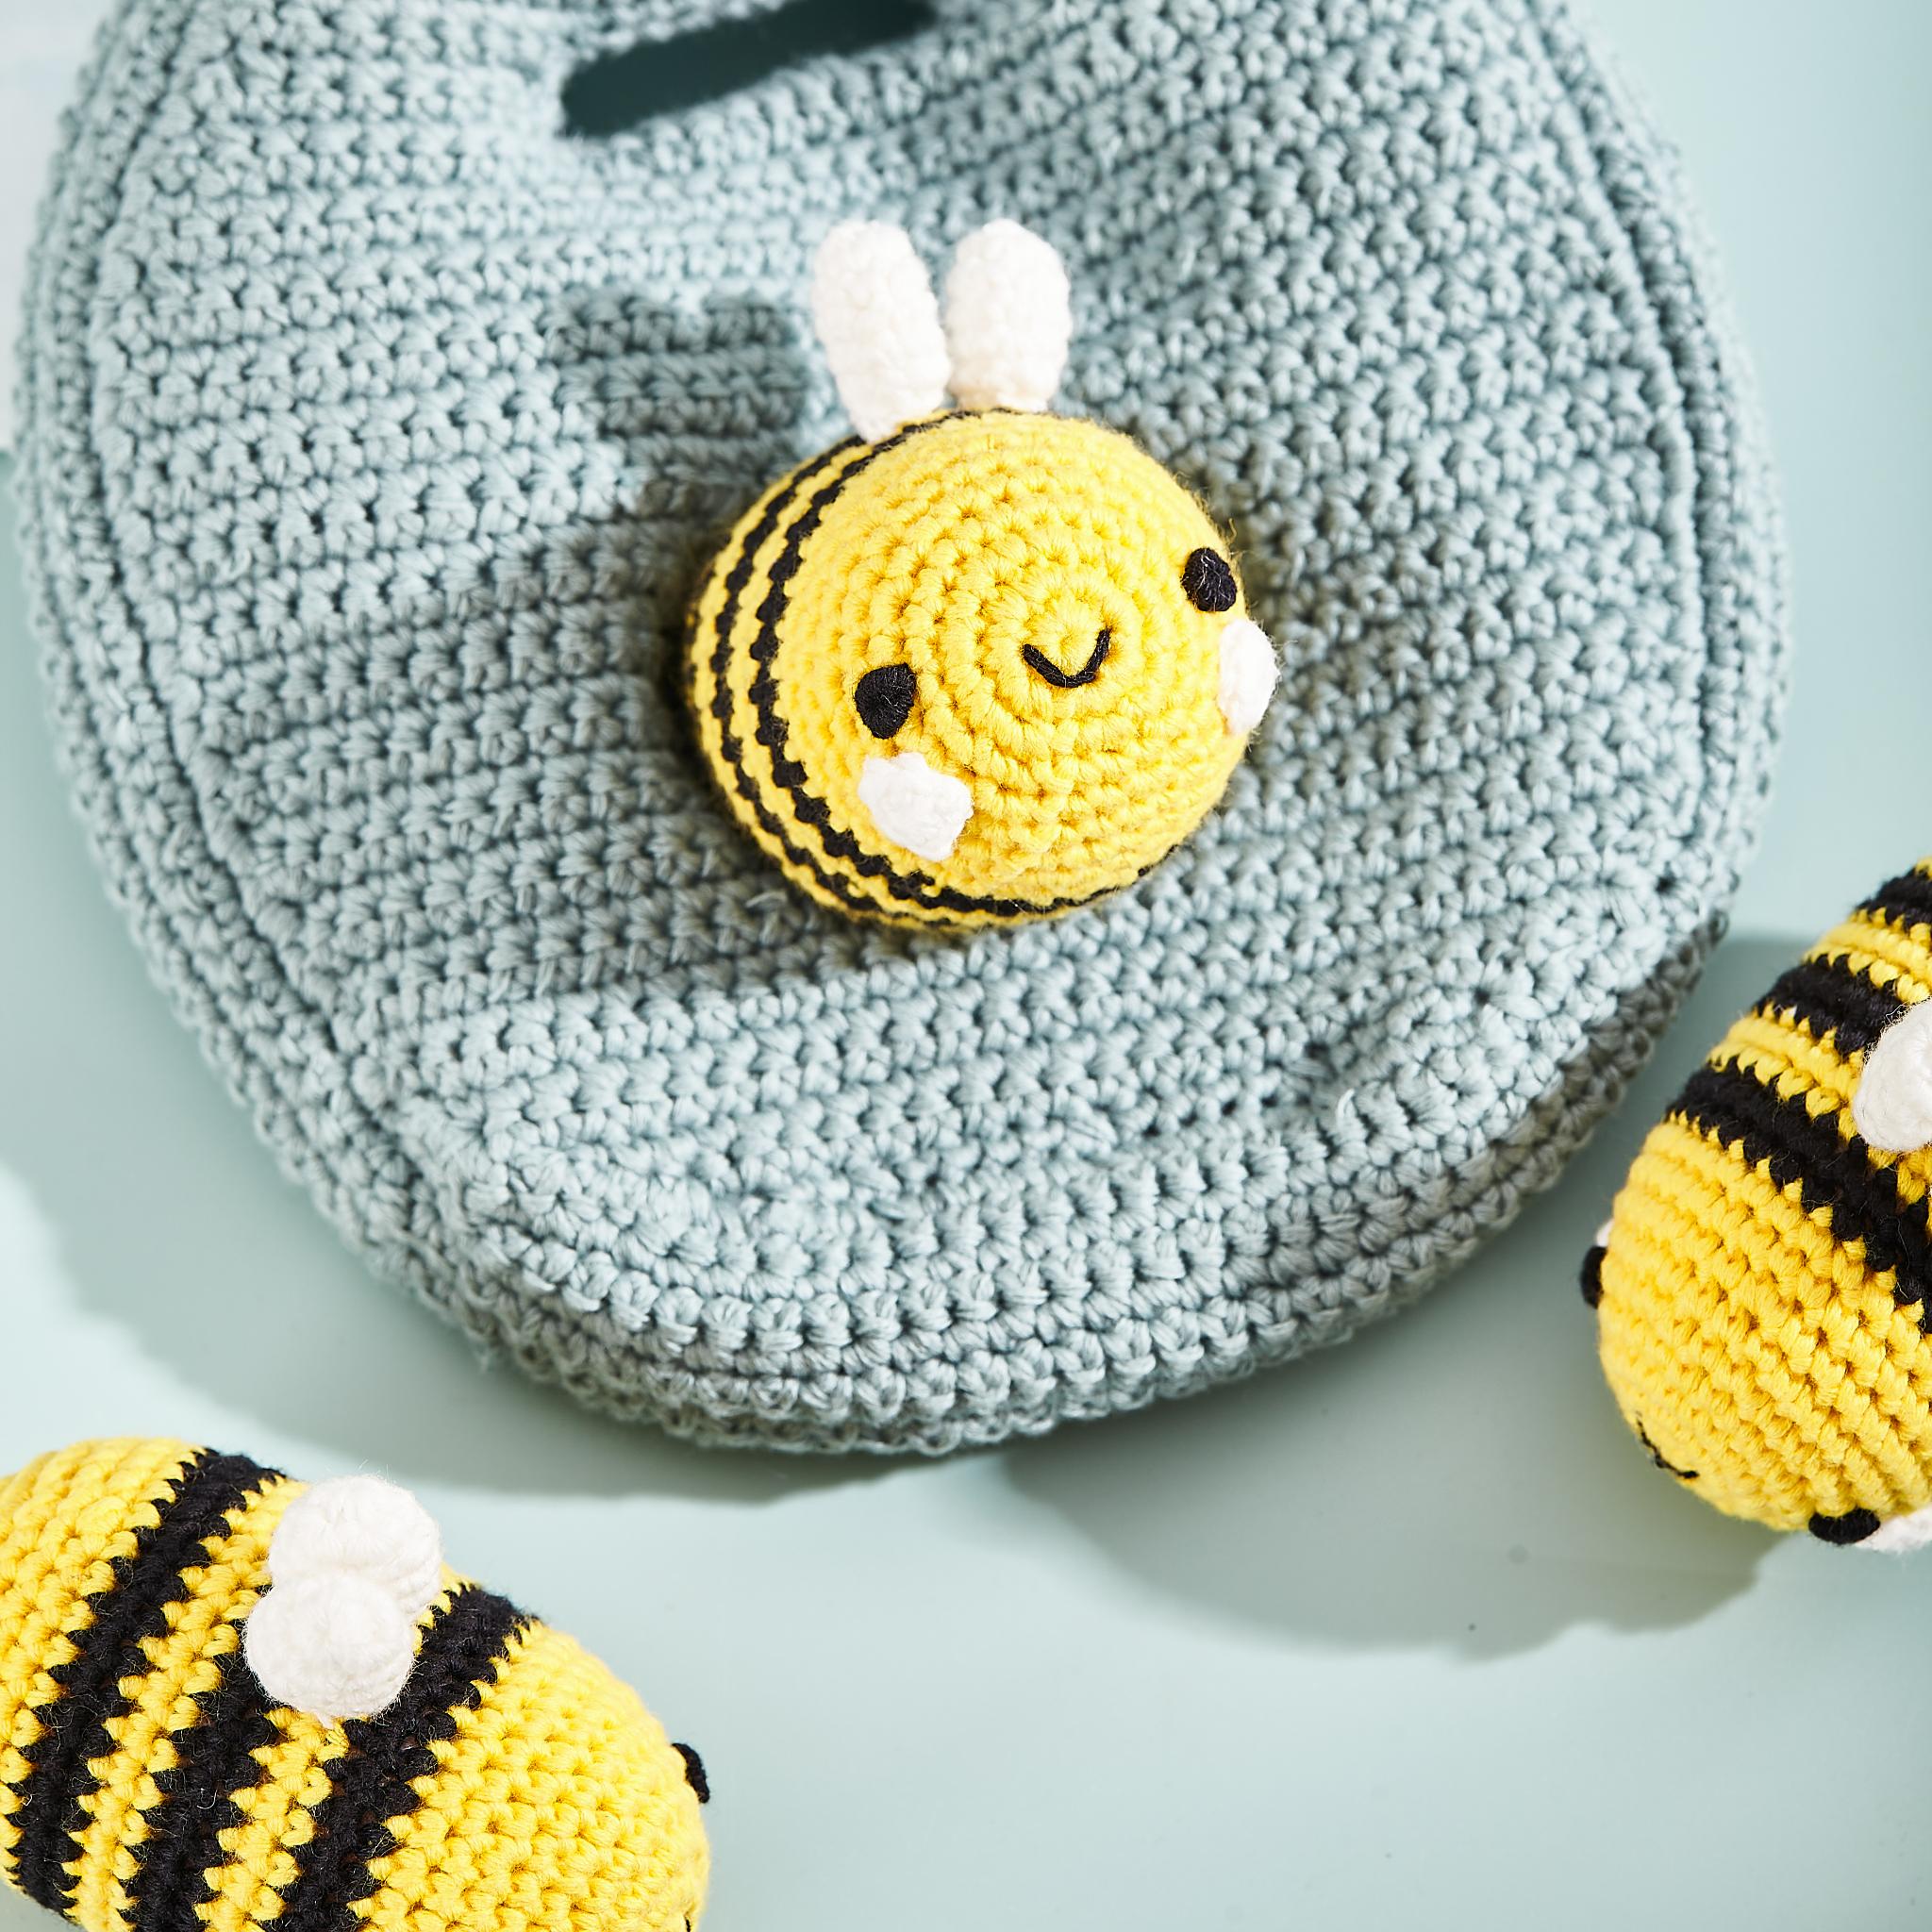 Crochet bees and beehive from organic cotton